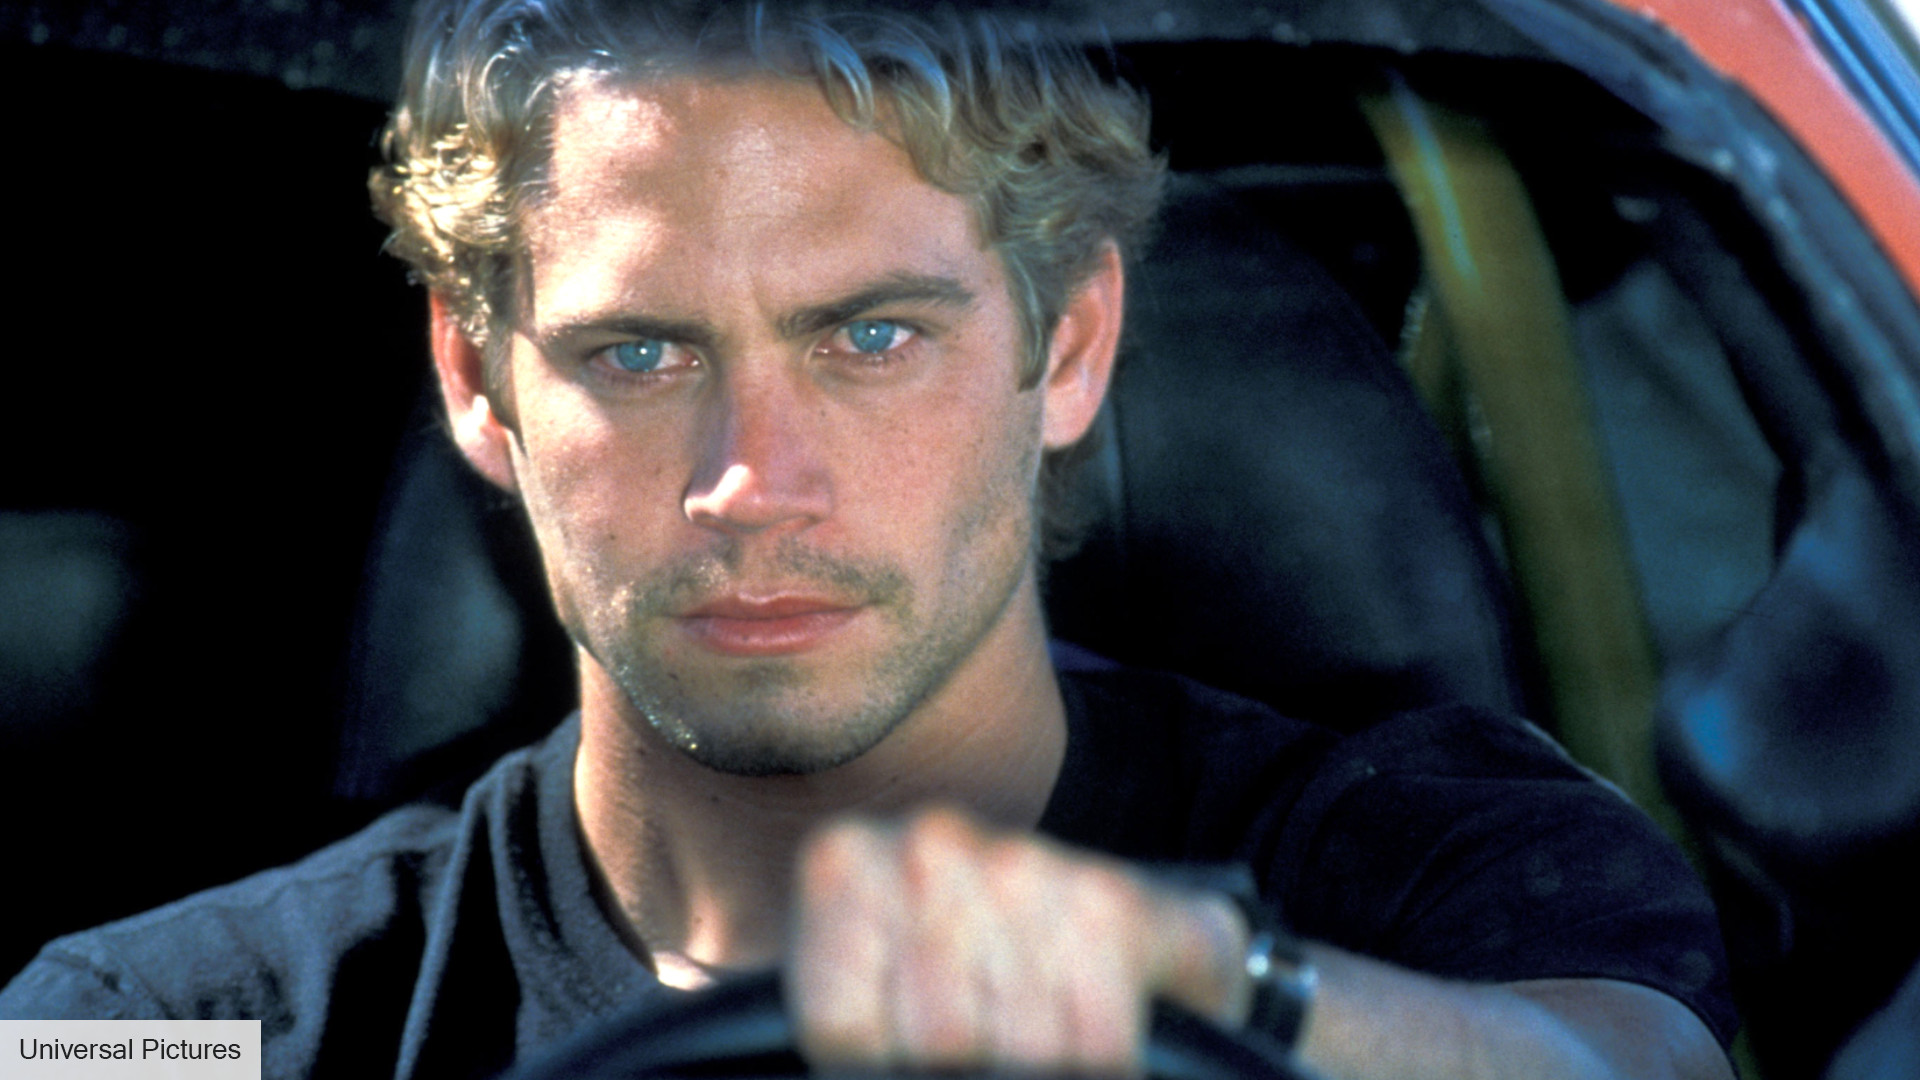 Kapper De layout Haringen Paul Walker of Fast and Furious movies to receive star on Walk of Fame |  The Digital Fix